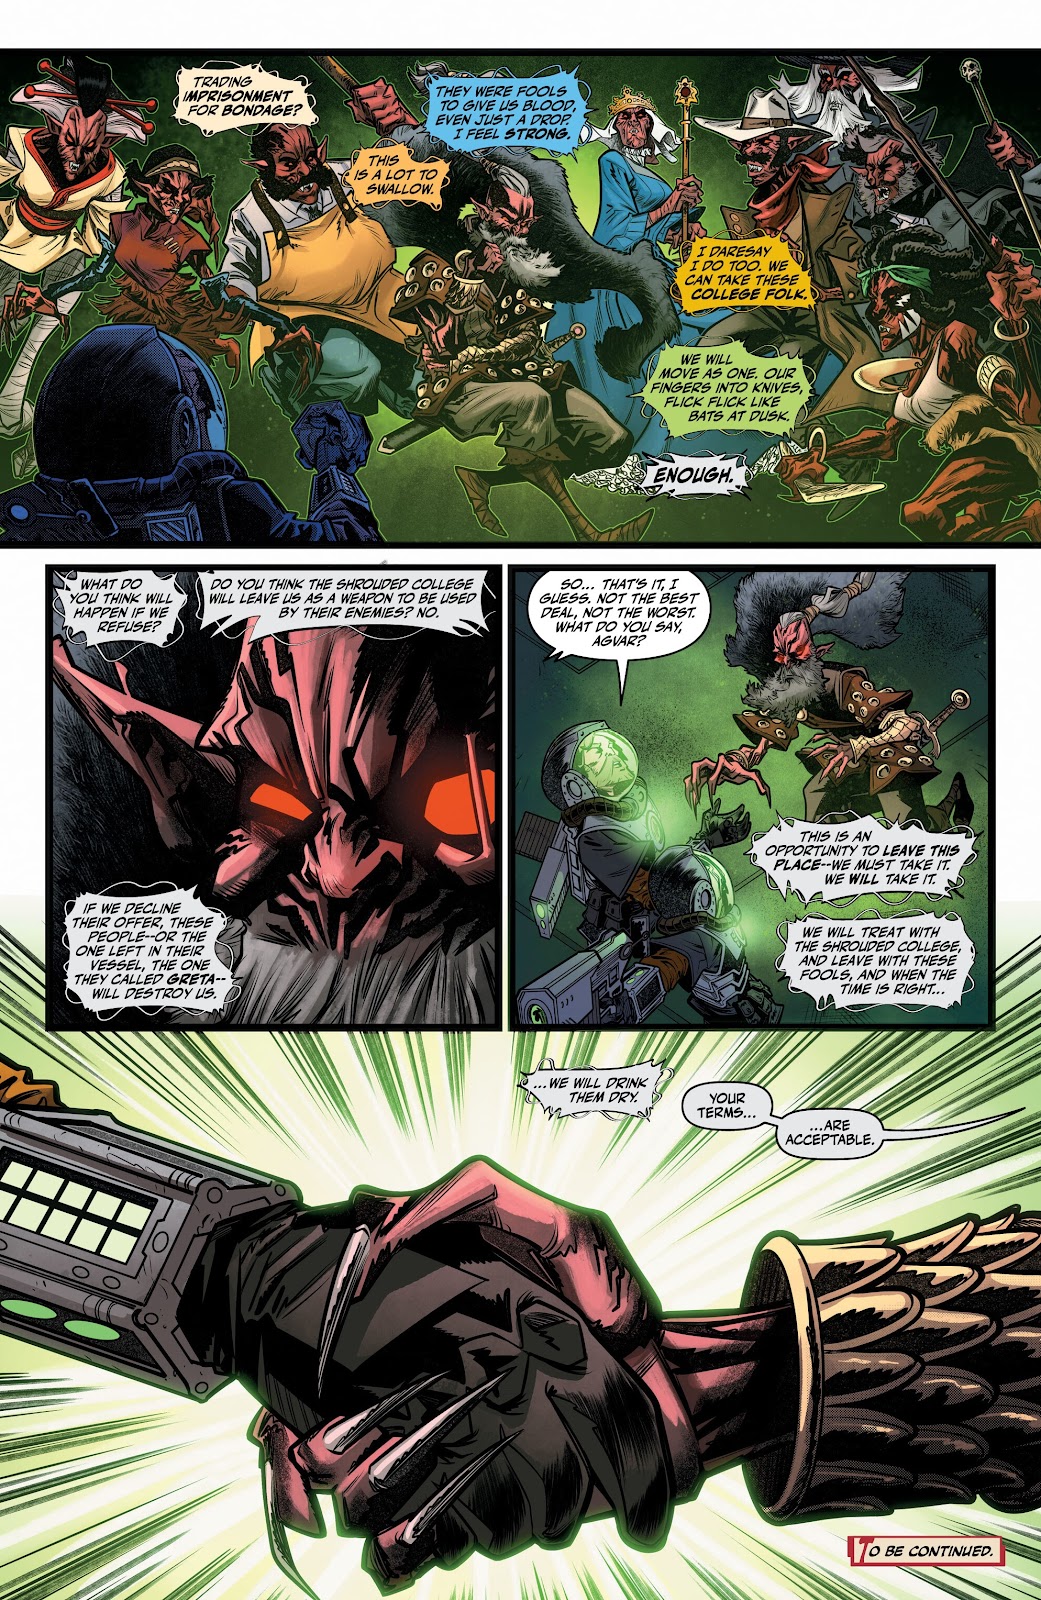 The Bloody Dozen: A Tale of the Shrouded College issue 3 - Page 20